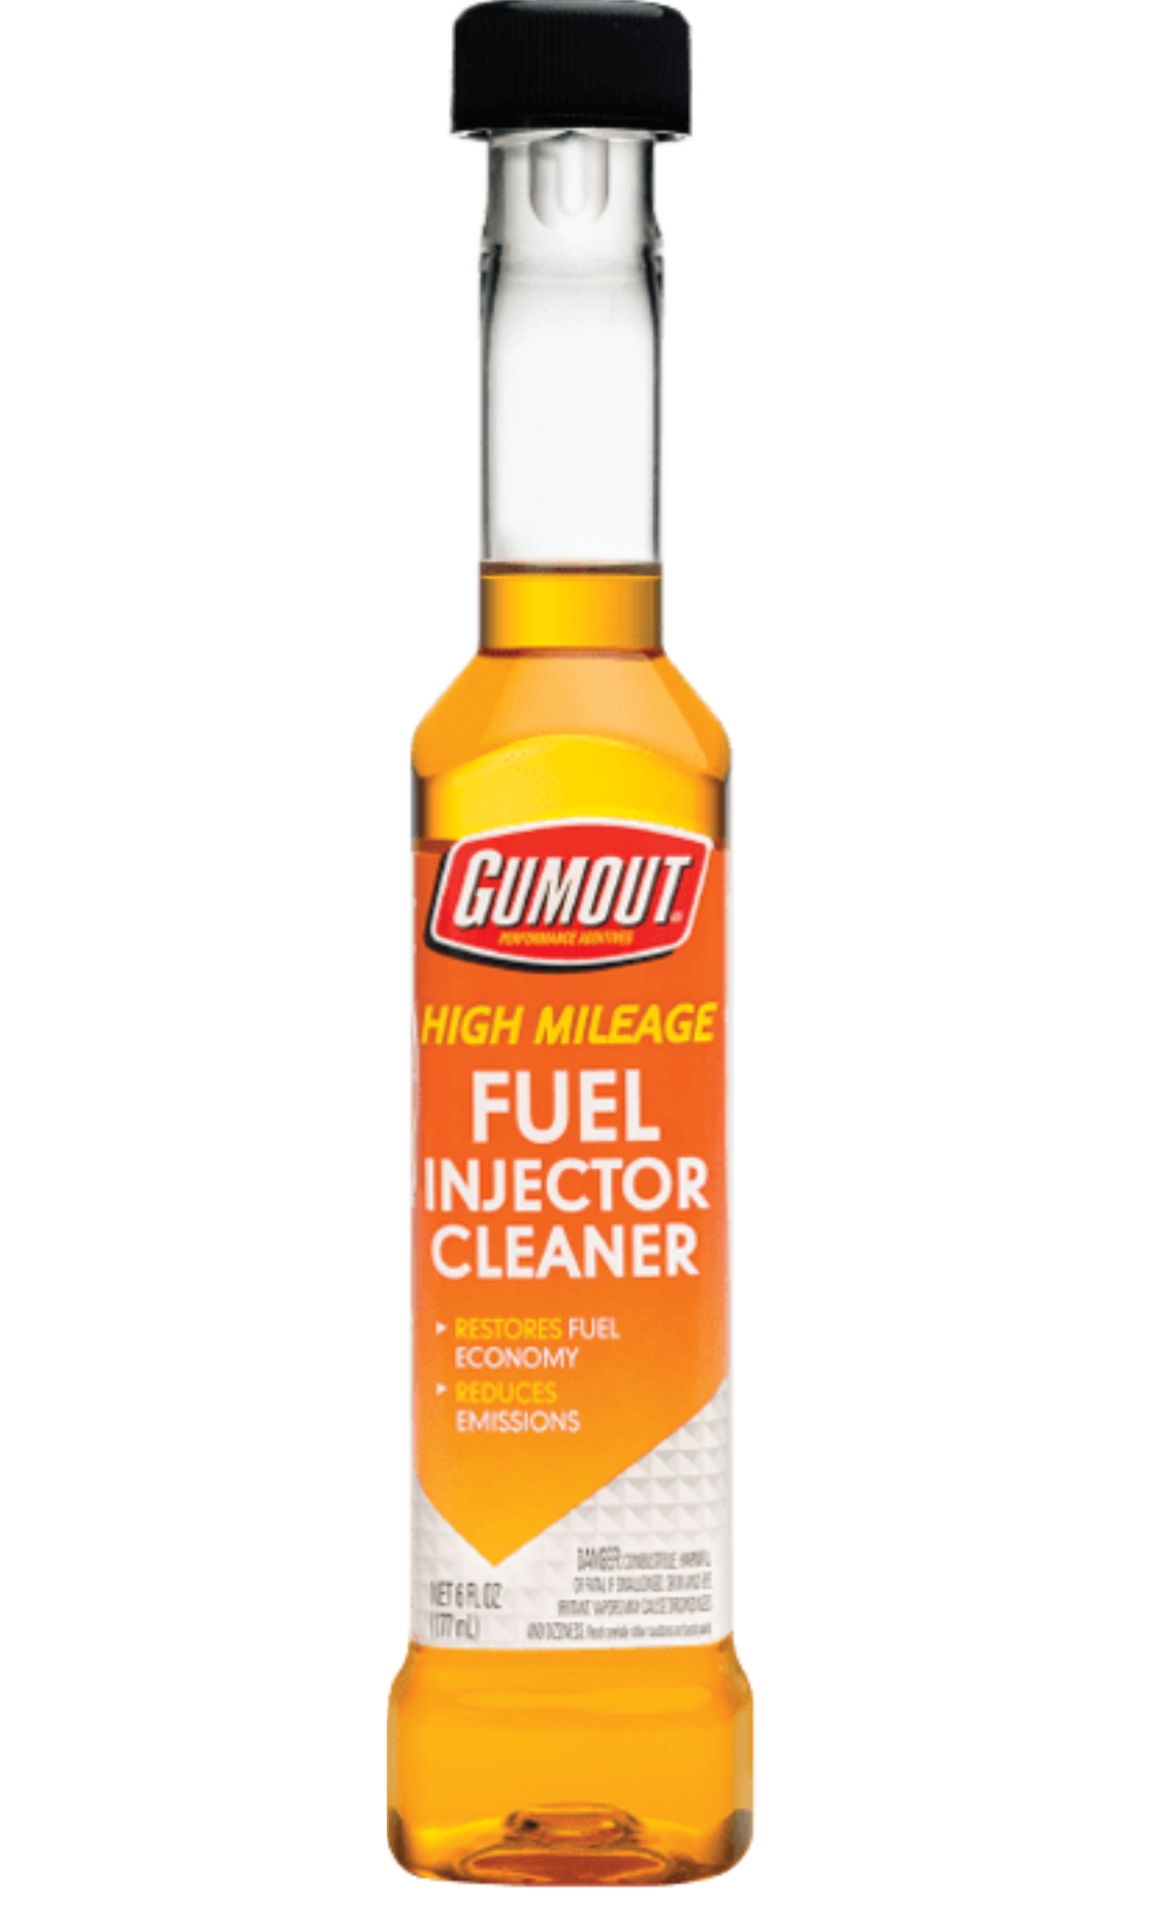 Gumout High Mileage Fuel Injector Cleaner 6/6 oz. - Yoder Oil